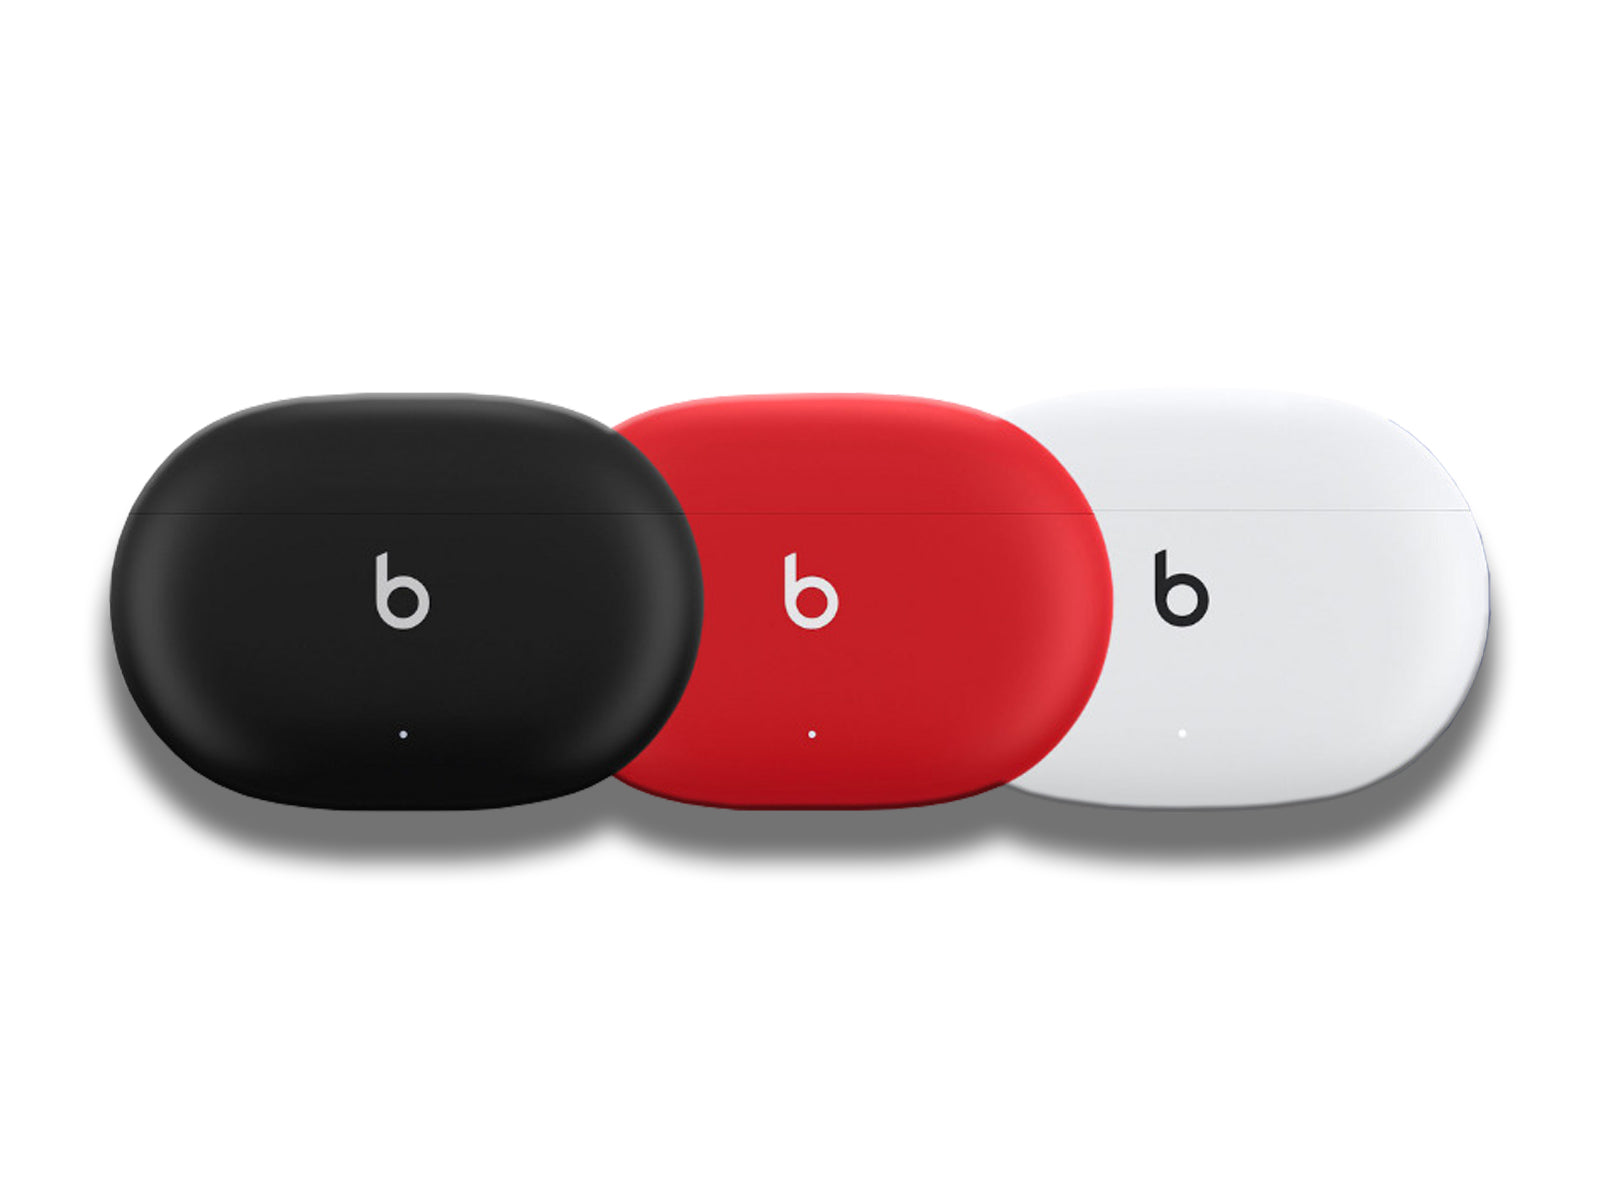 Beats Studio Buds Noise Cancelling Earphones In Black, Red, And White